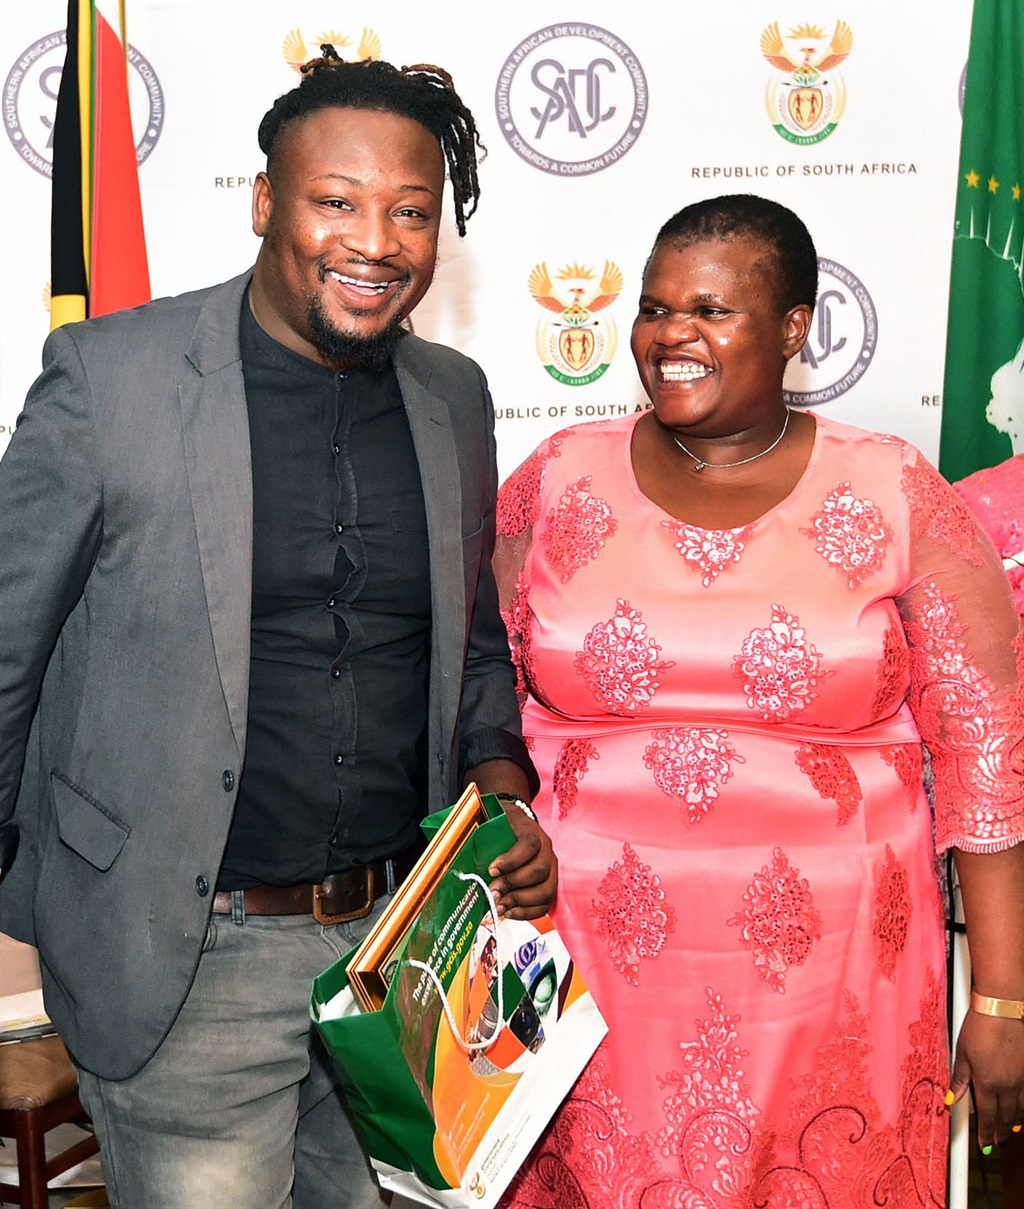 Communications Minister Faith Muthambi handing over the prize to City Press Photographer Leon Sadiki, the winner in Photojournalism category of SADC Media Awards held at Freedom Park in Pretoria. Picture: Kopano Tlape/GCIS 